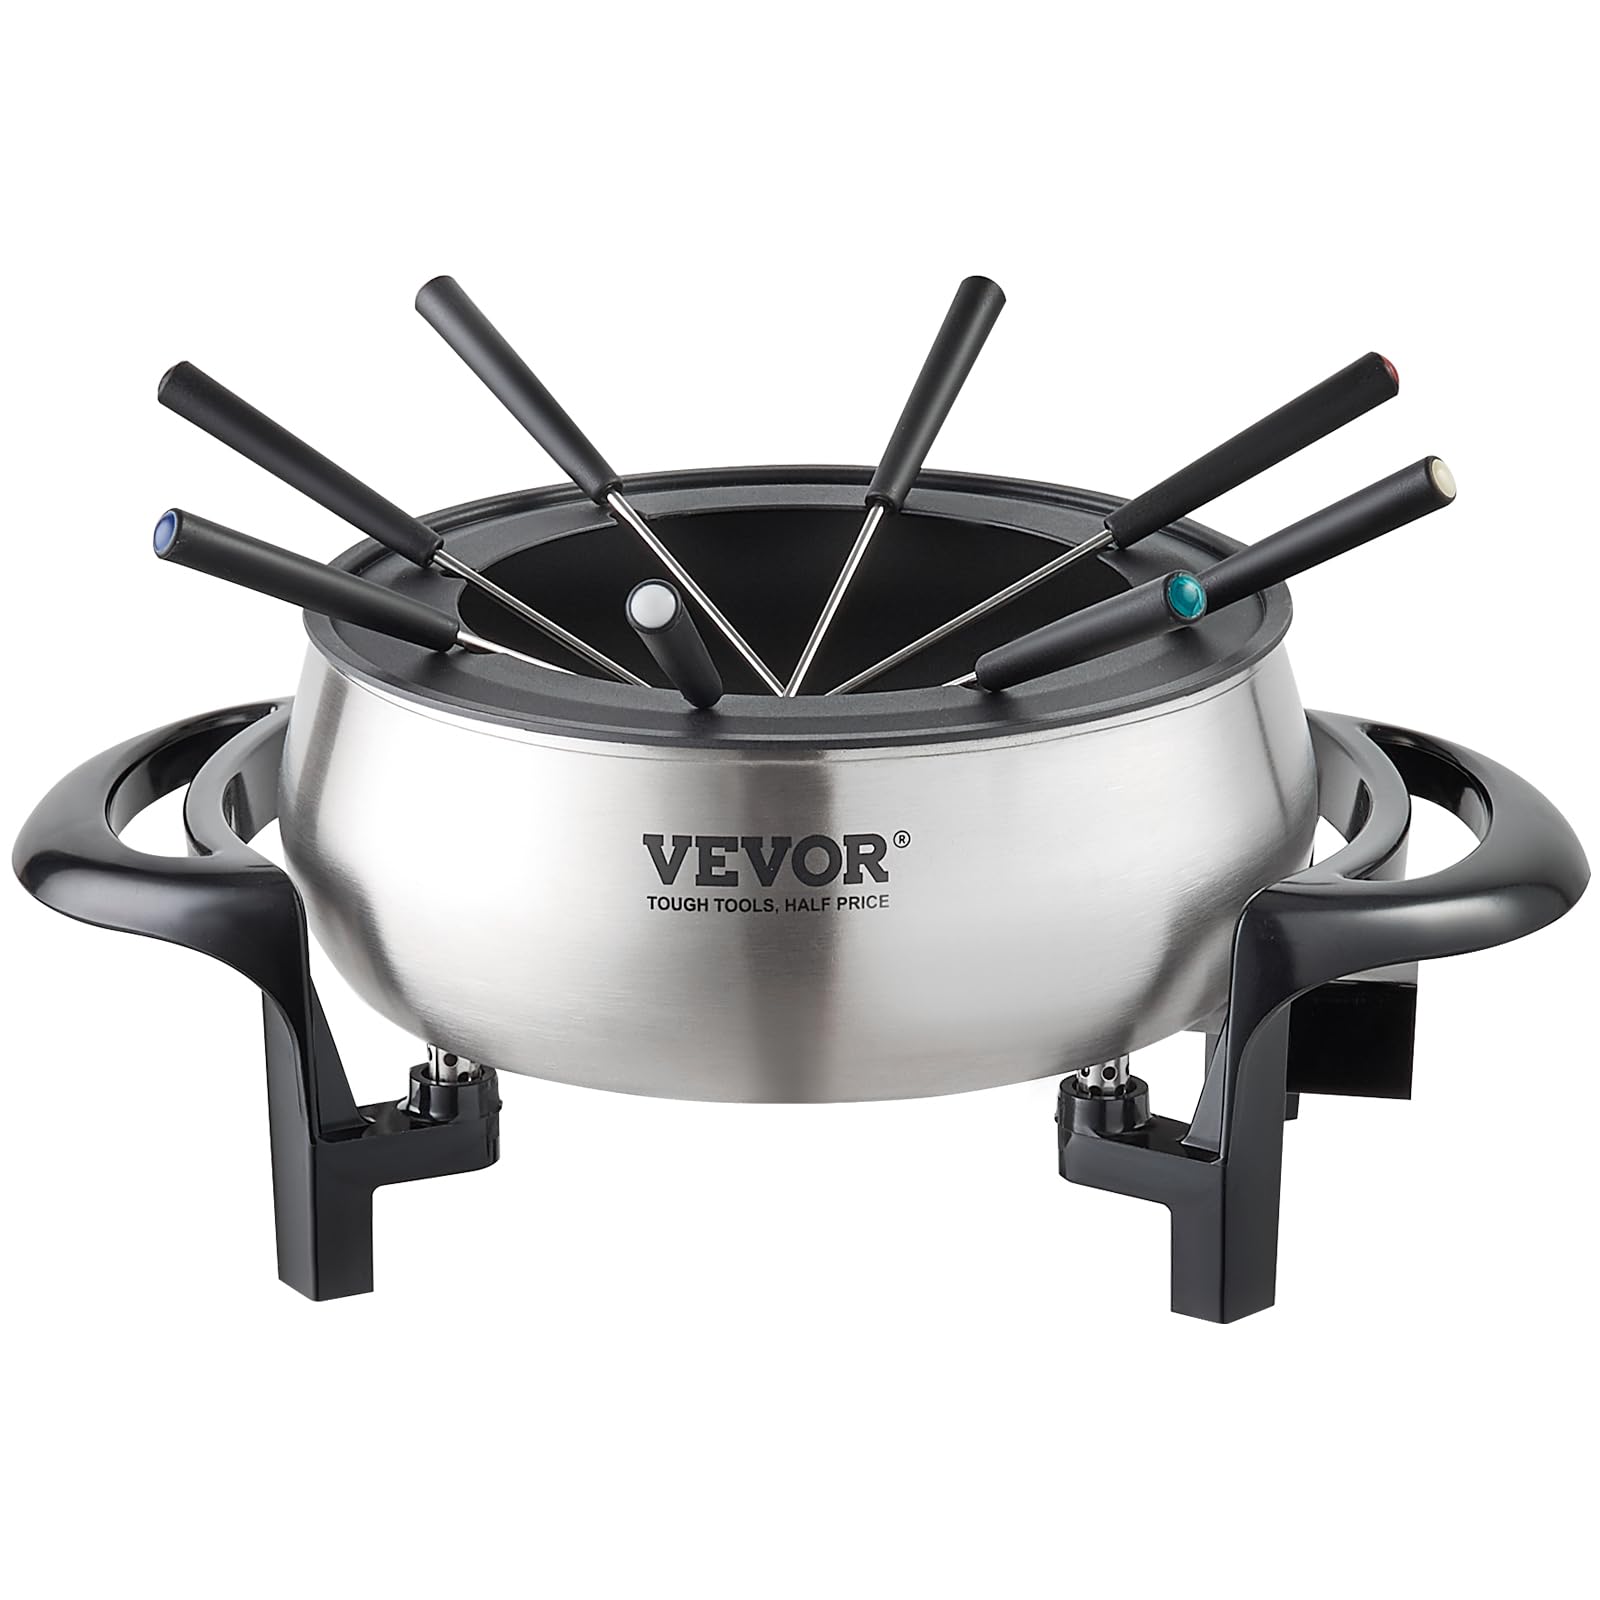 VEVOR Electric Fondue Pot Set, 3 Qt Melter for Cheese & Chocolate with 8 Forks, Candy Warmer with Temp Control, 1000W Non-Stick Stainless Steel Melting for Dessert, Broth, Wax Candle, Party Gift